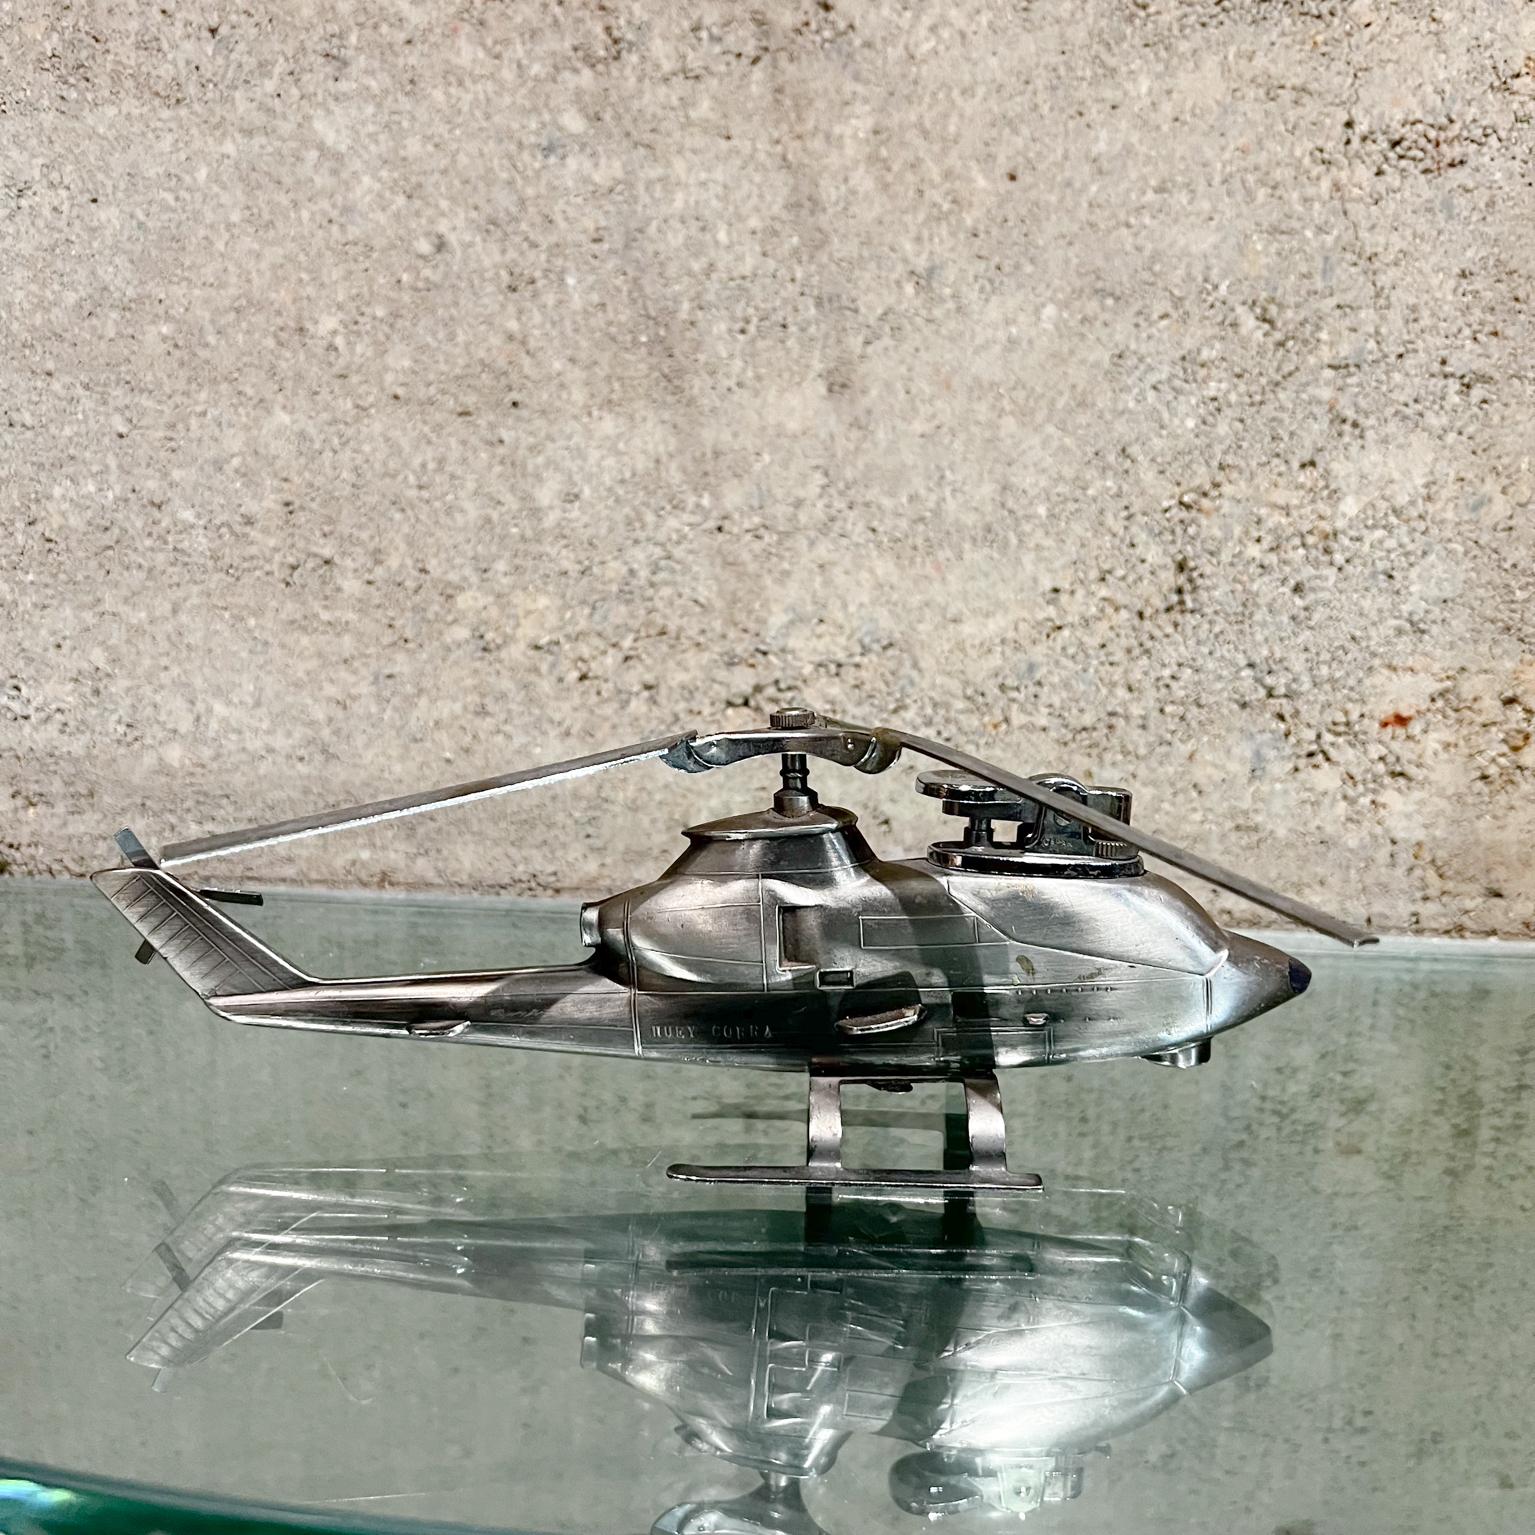 1980s Vintage table lighter chrome plated steel beautiful helicopter design.
Lighter is stamped Japan.
In the shape of a Huey Cobra Helicopter
Measures: 3 tall x 7.5 wide x 9 deep
Needs service, tested and not working at time of